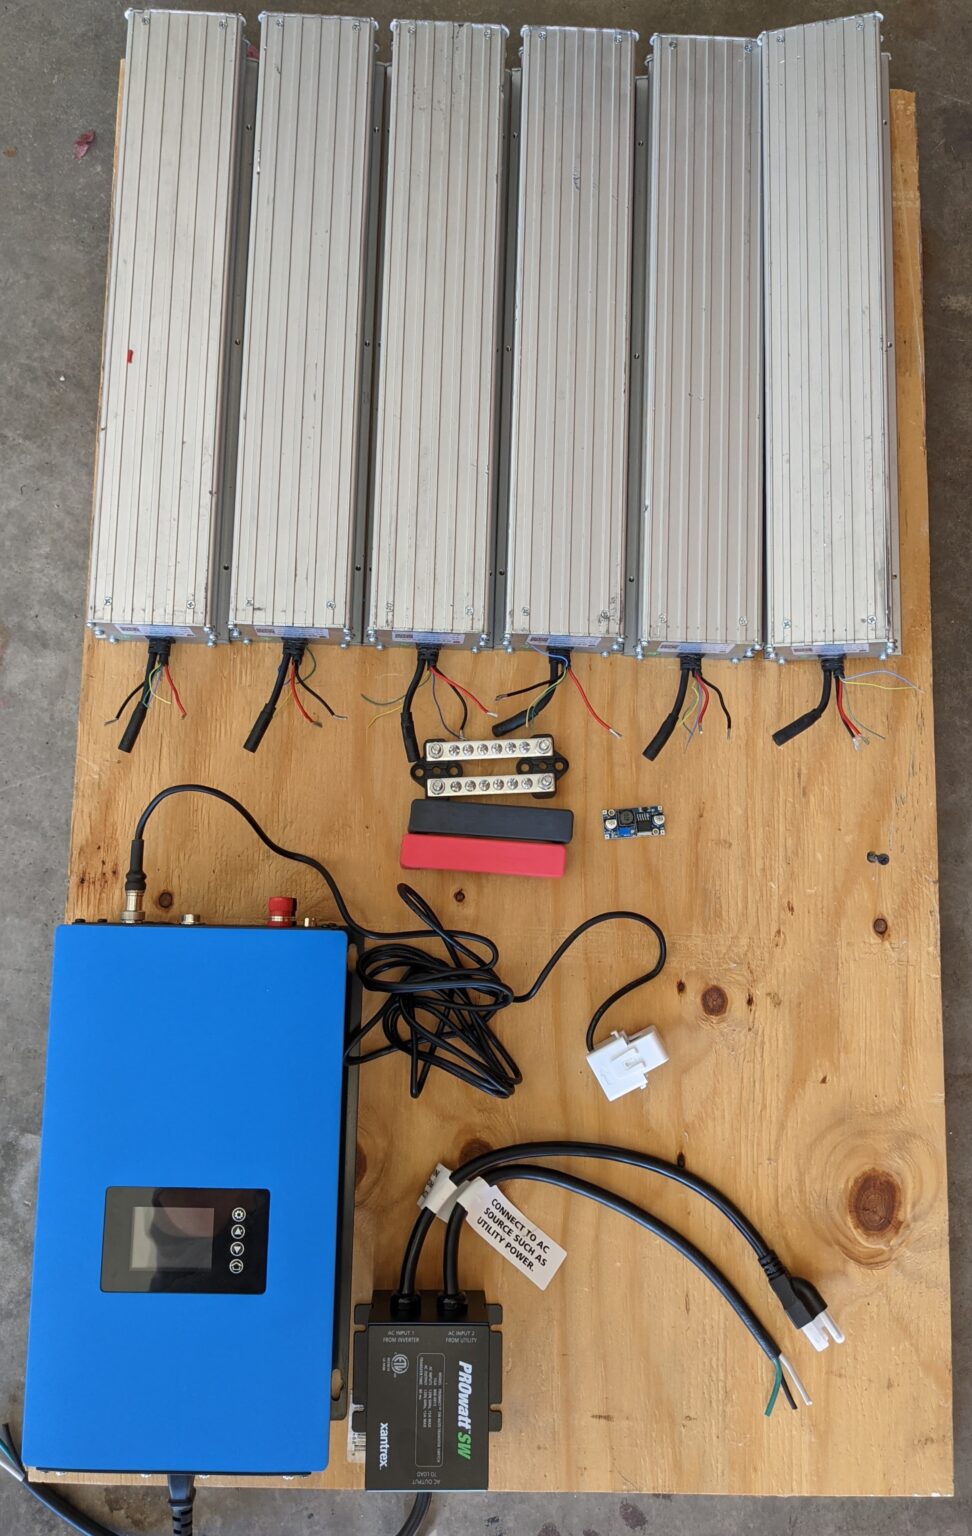 Hacking your SRP timeofuse bill with a DIY Tesla Powerwall made from